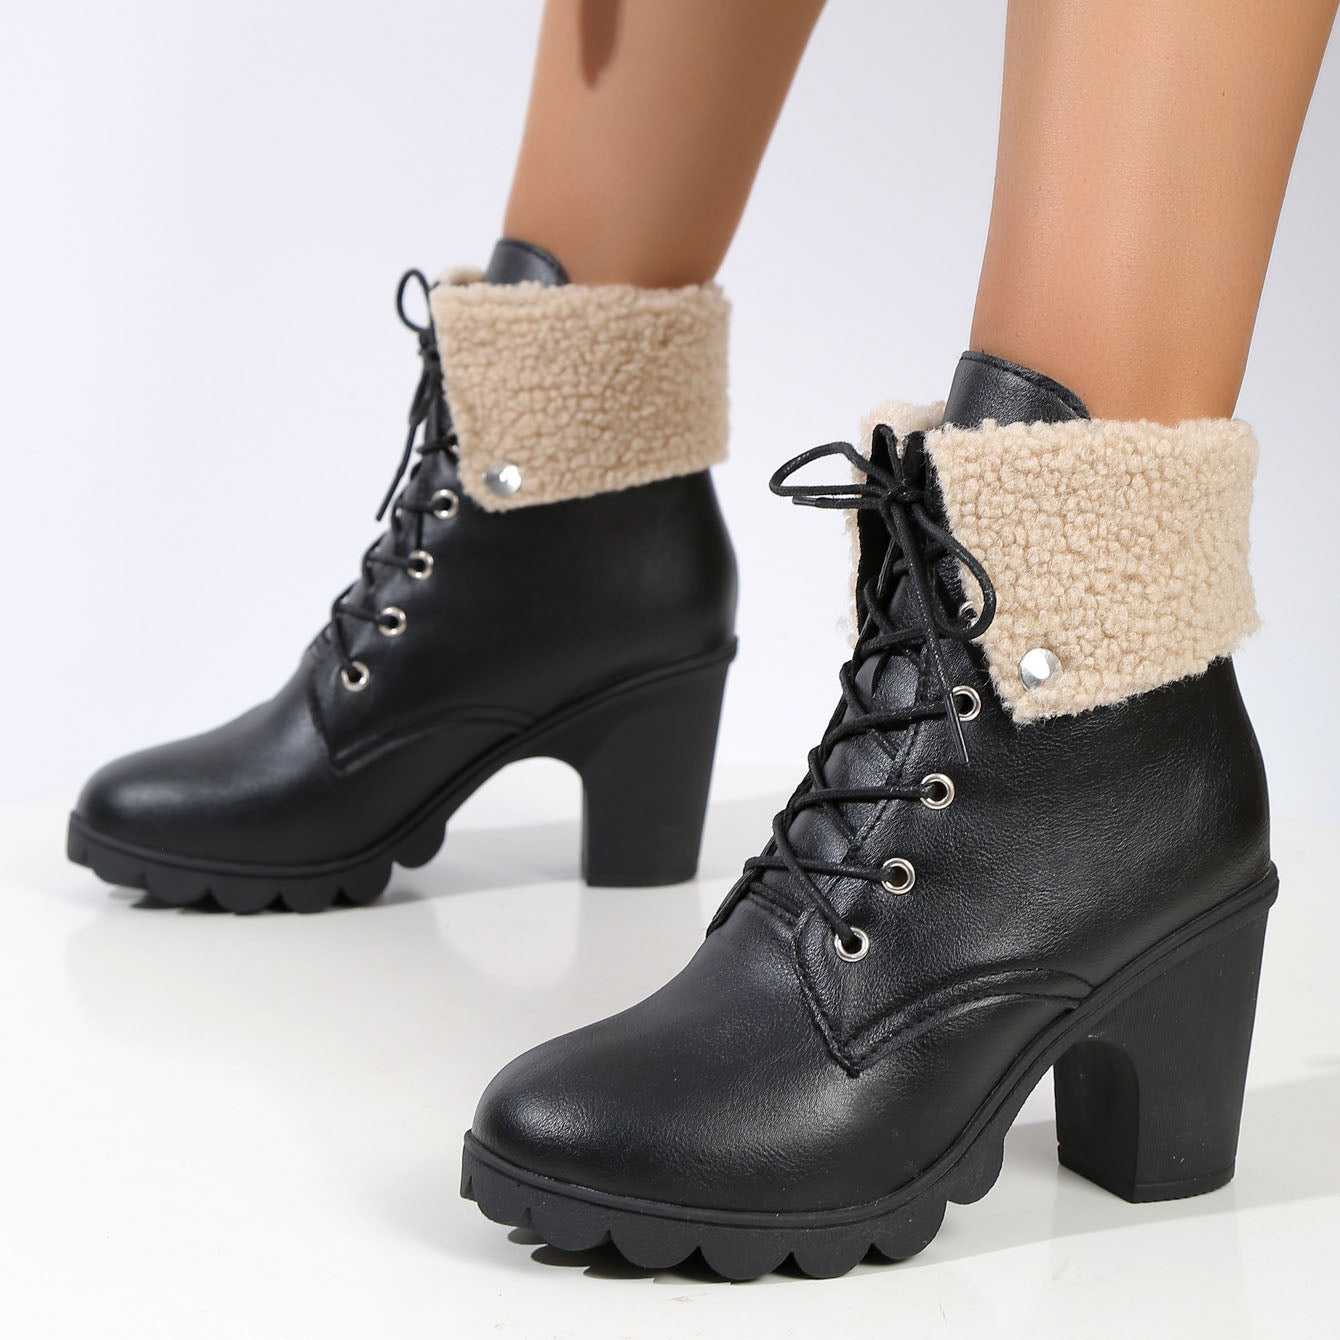 Retro suede round toe lace-up chunky heel short boots